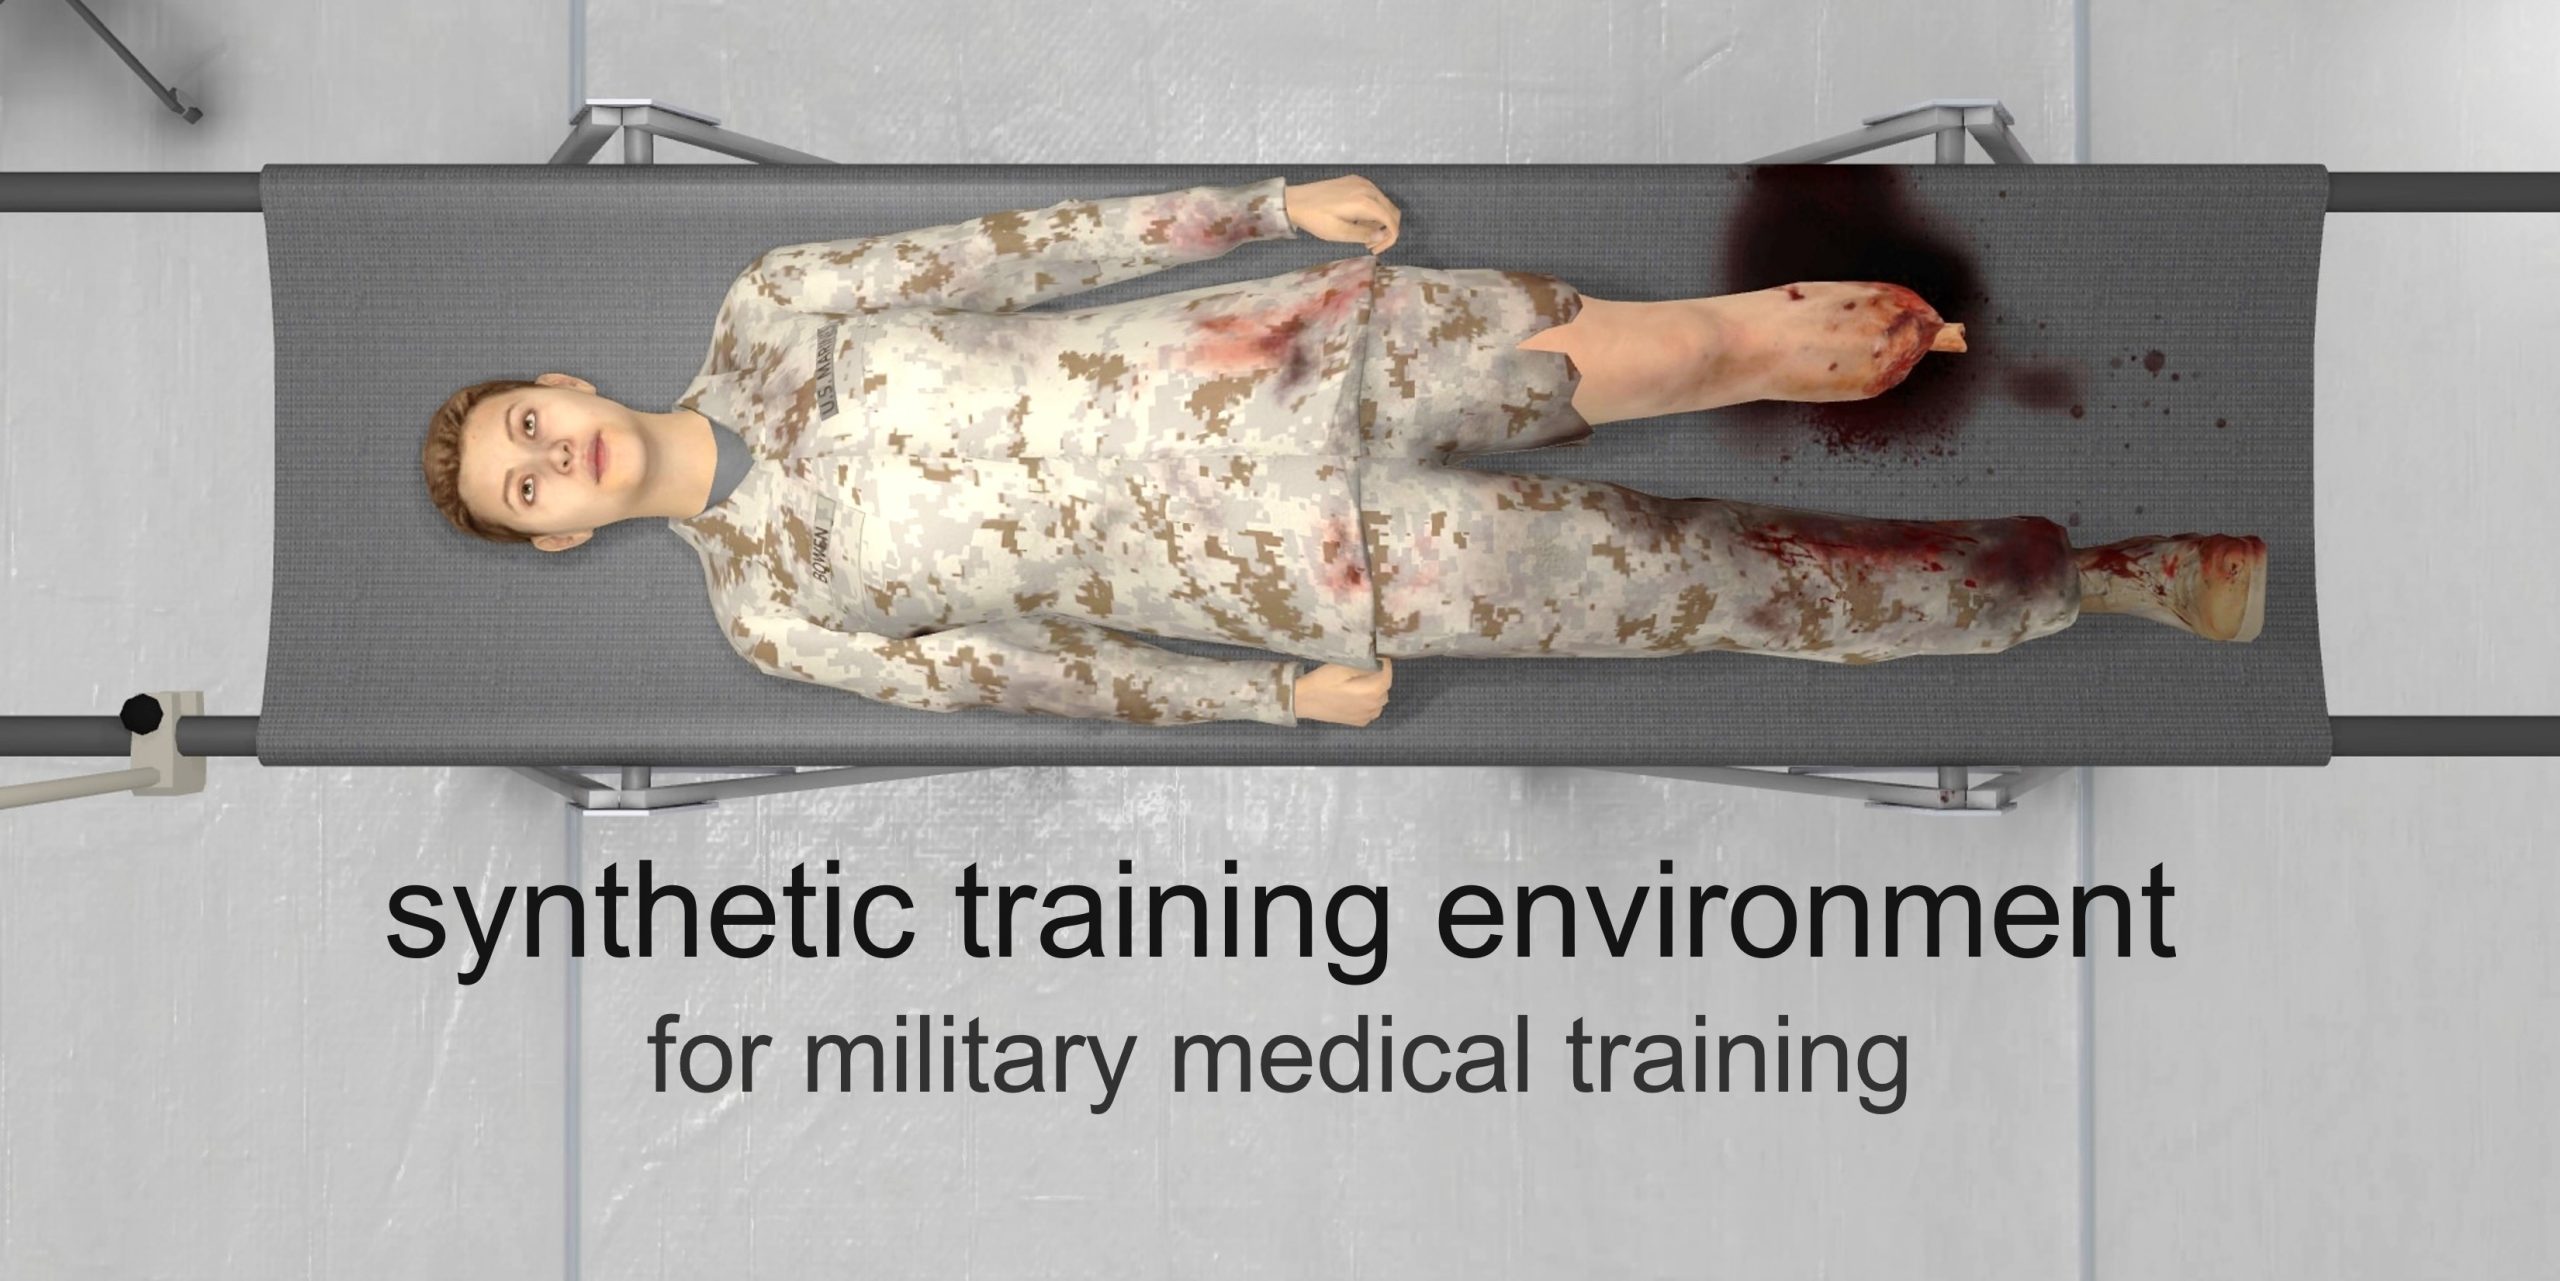 Synthetic training environment for military medical training